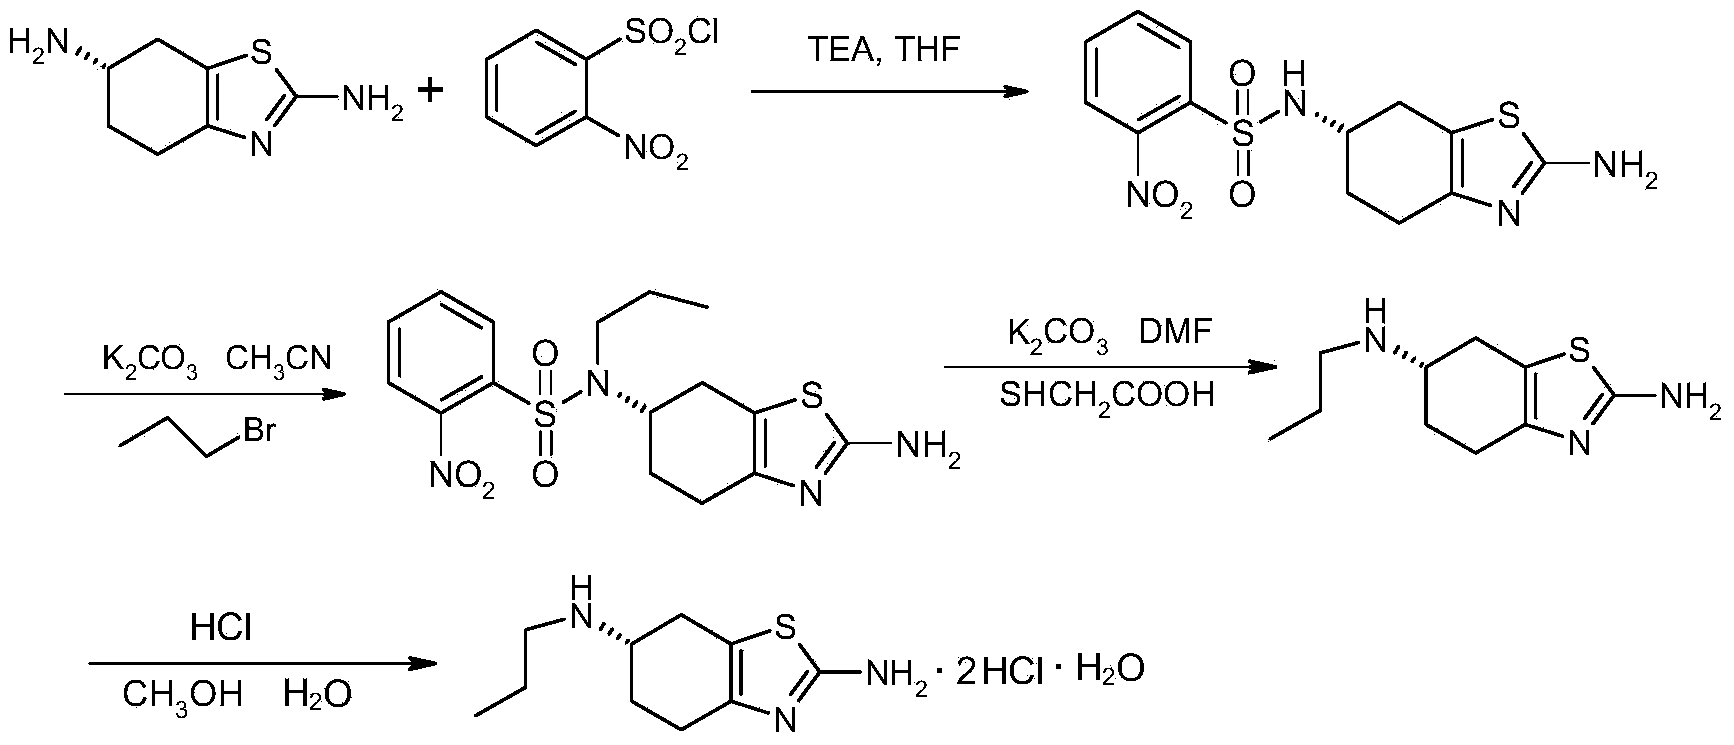 Process for synthesizing pramipexole